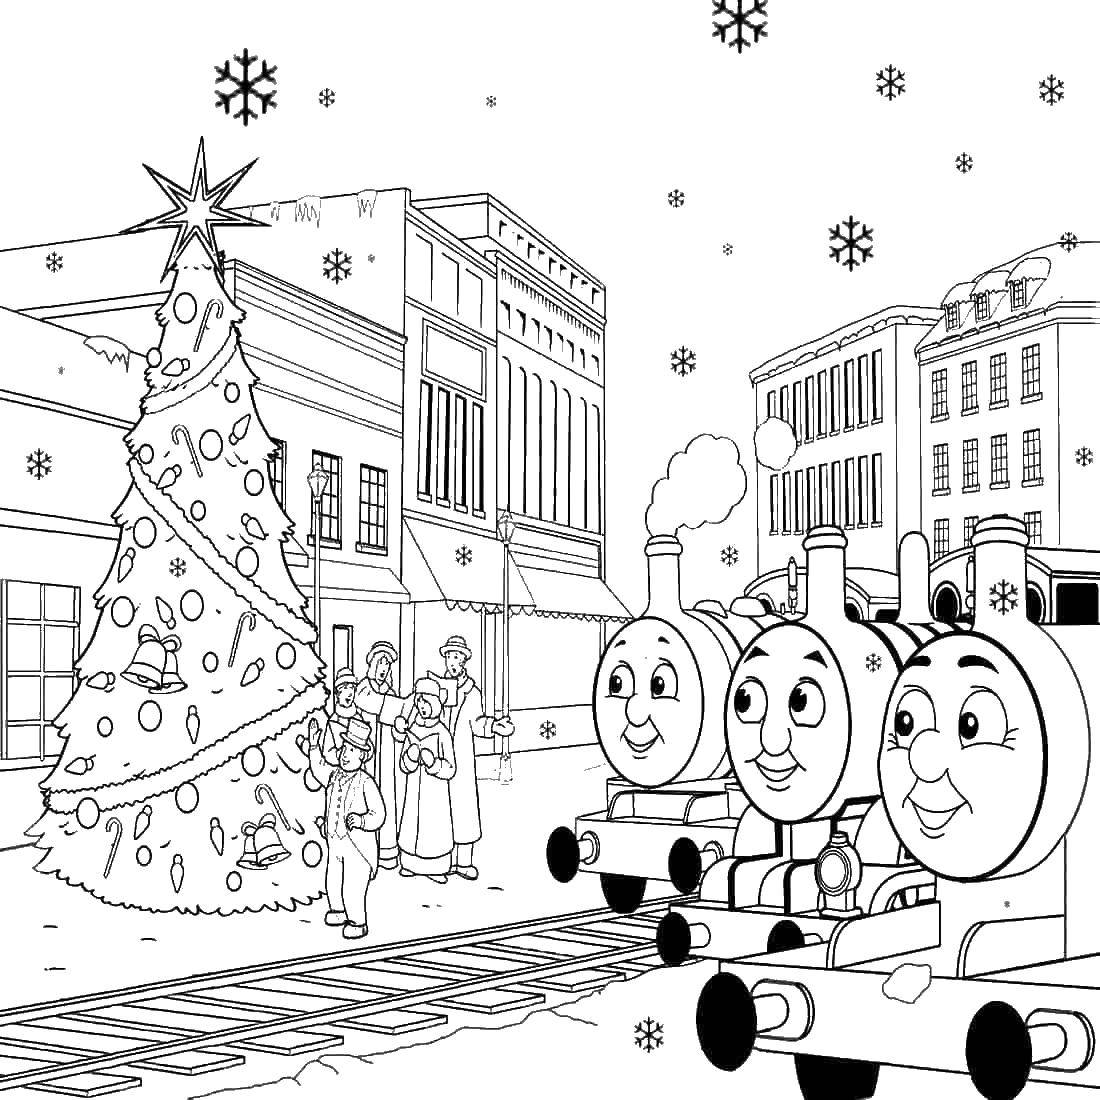 Coloring Train the Christmas tree. Category train. Tags:  trains, tree, Christmas.